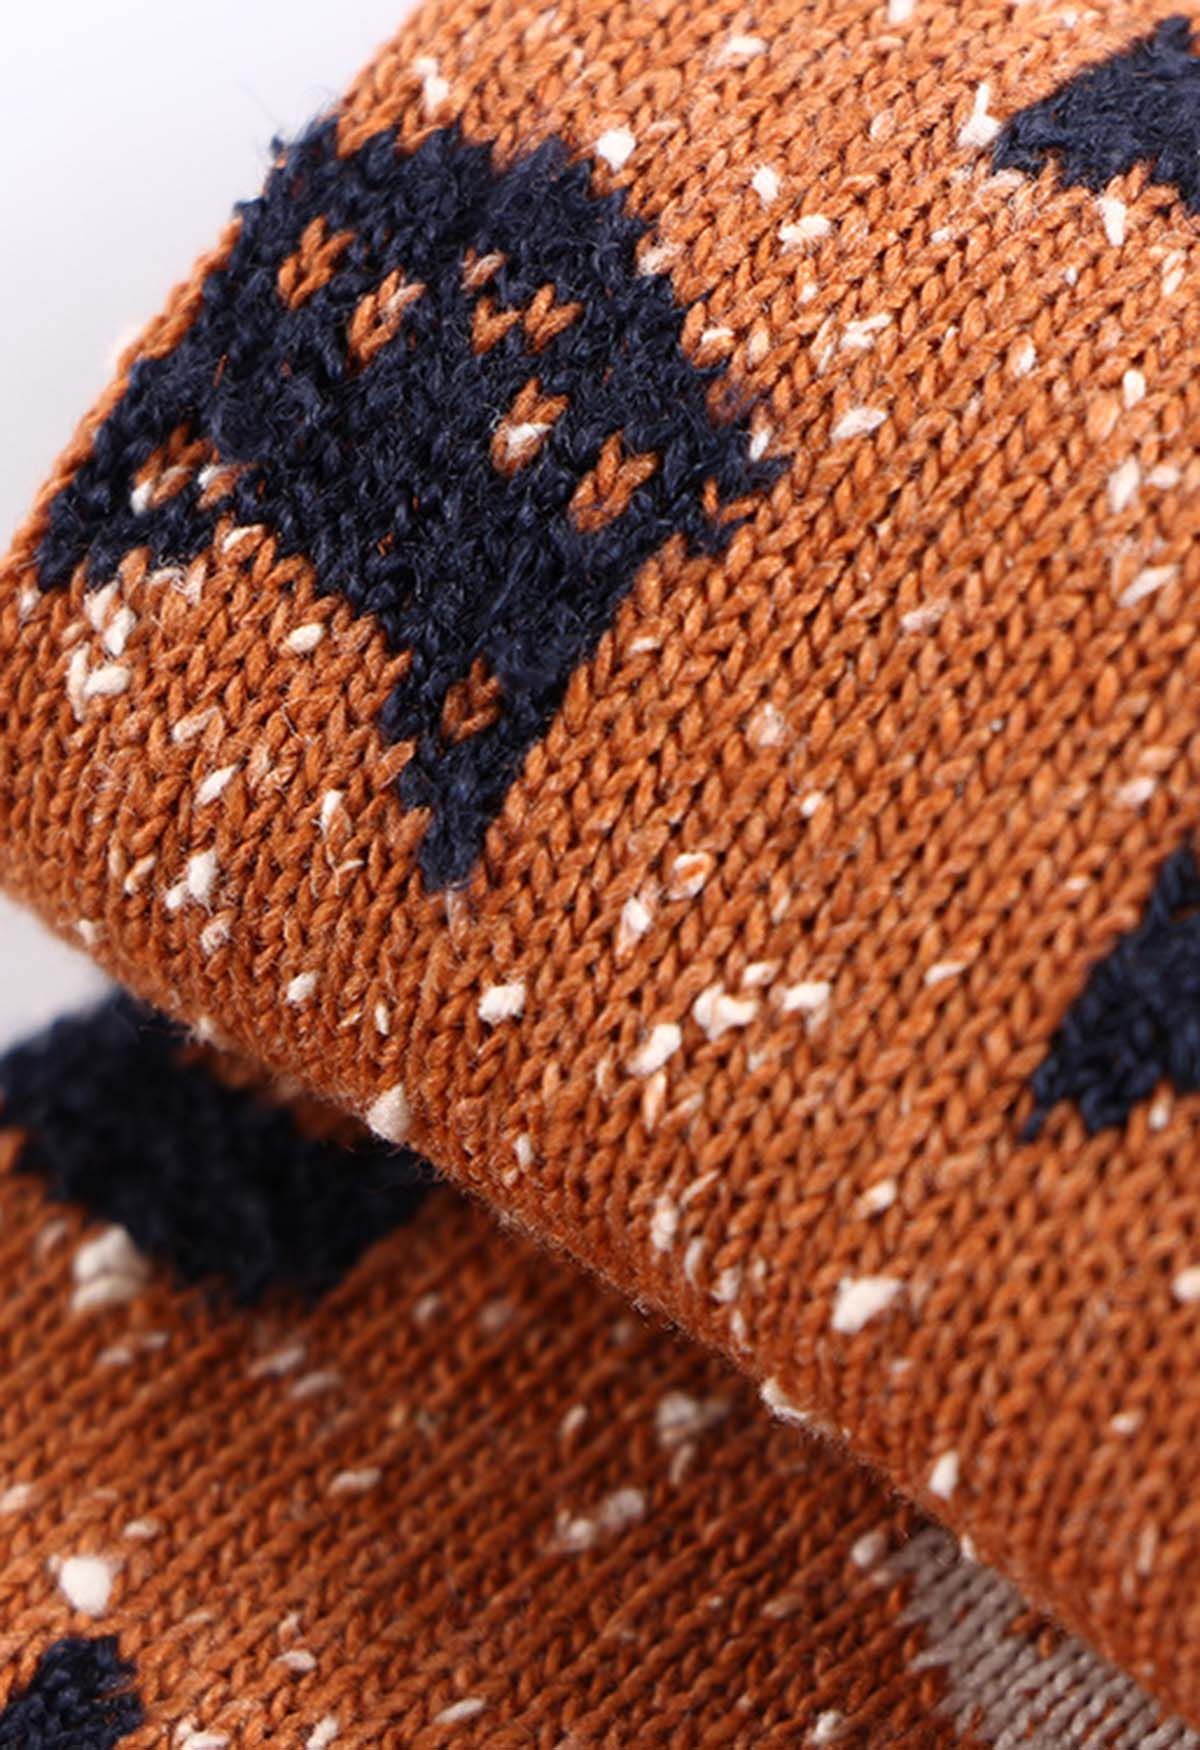 Cat and Fish Pattern Dotted Crew Socks